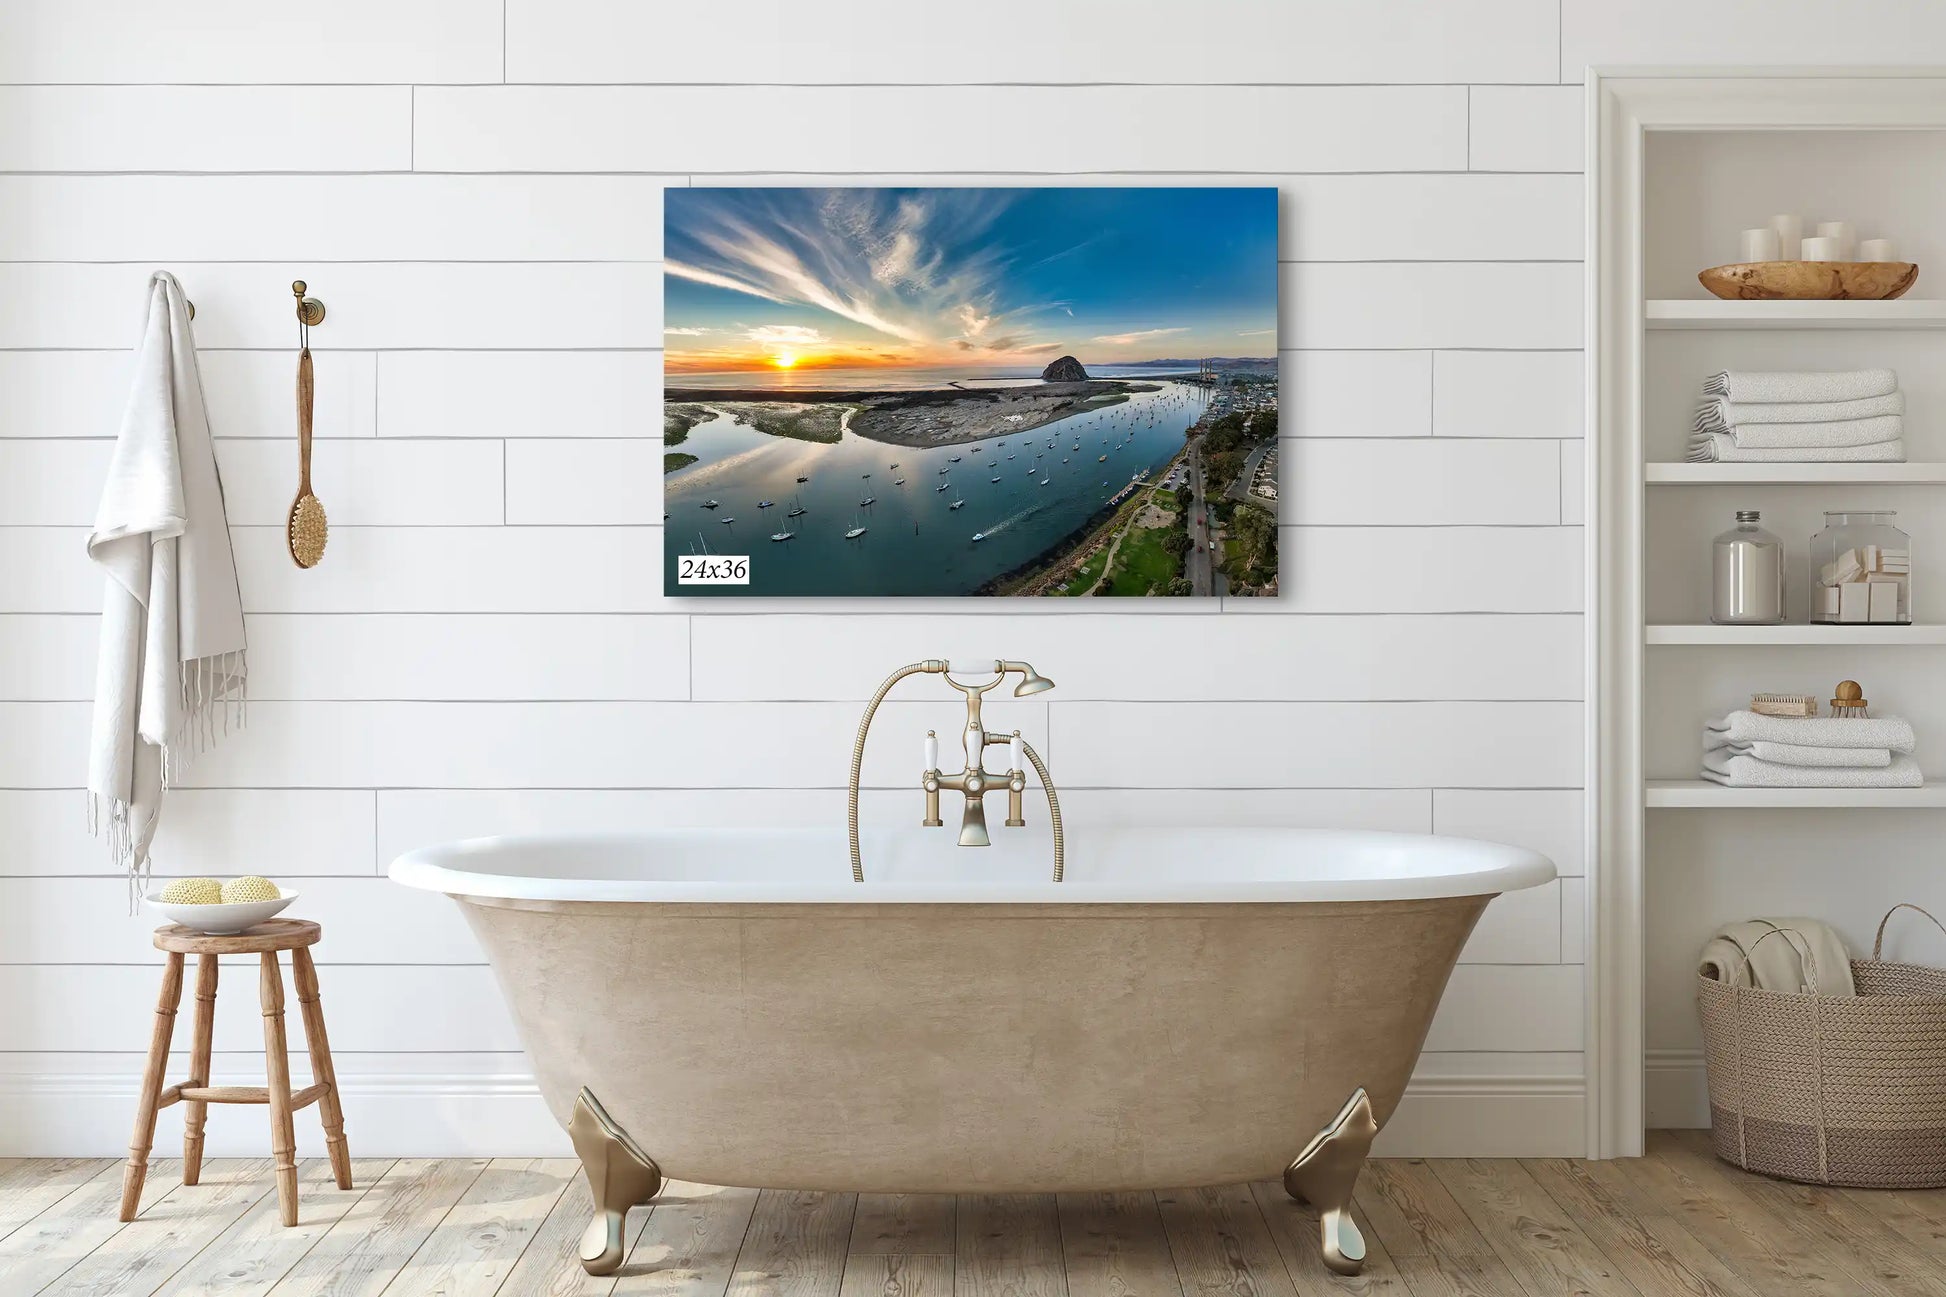 A 24x36 canvas print over a bed, displaying Morro Bay's sunset splendor, perfect for central coast aficionados seeking serene home decor.